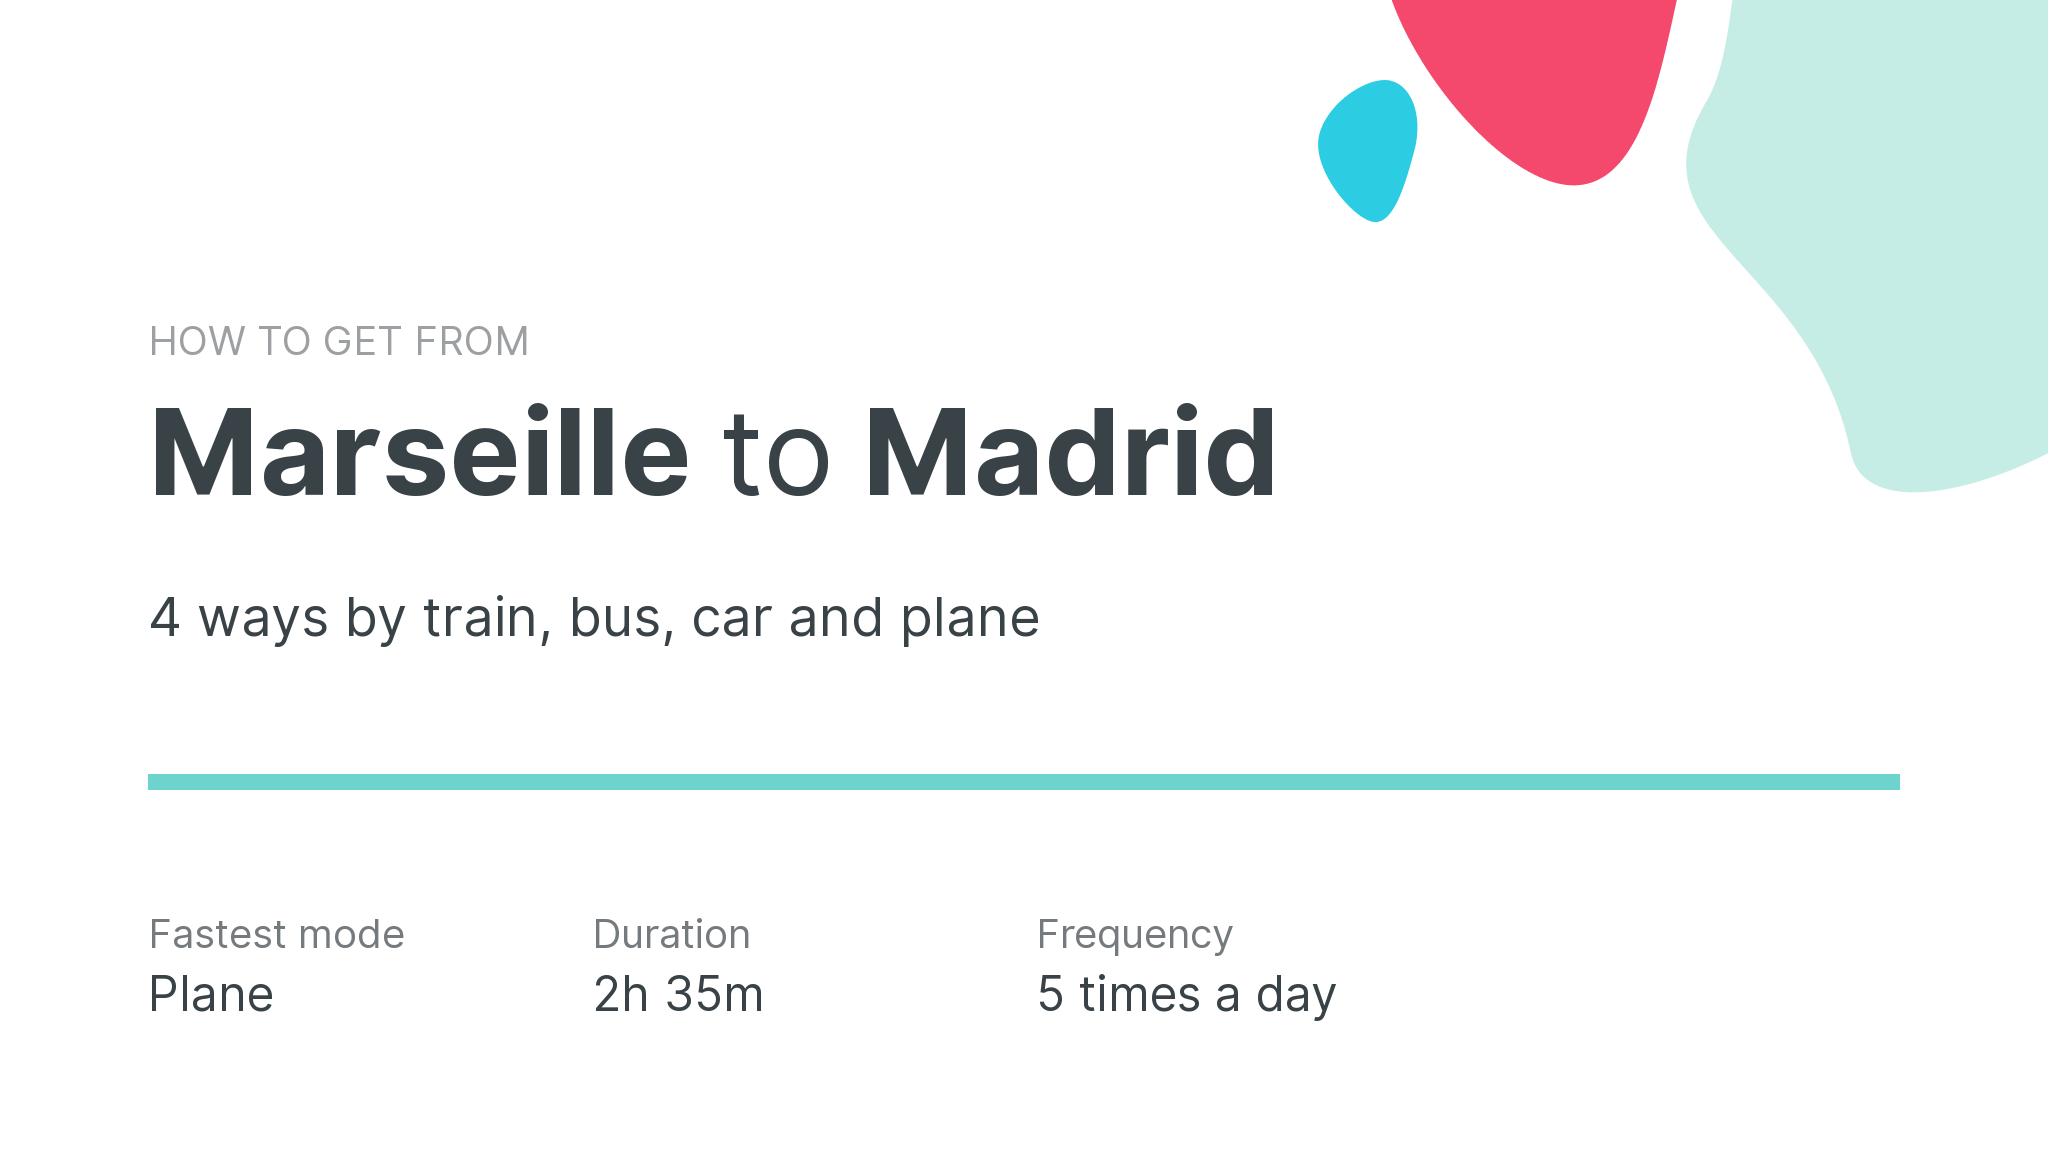 How do I get from Marseille to Madrid